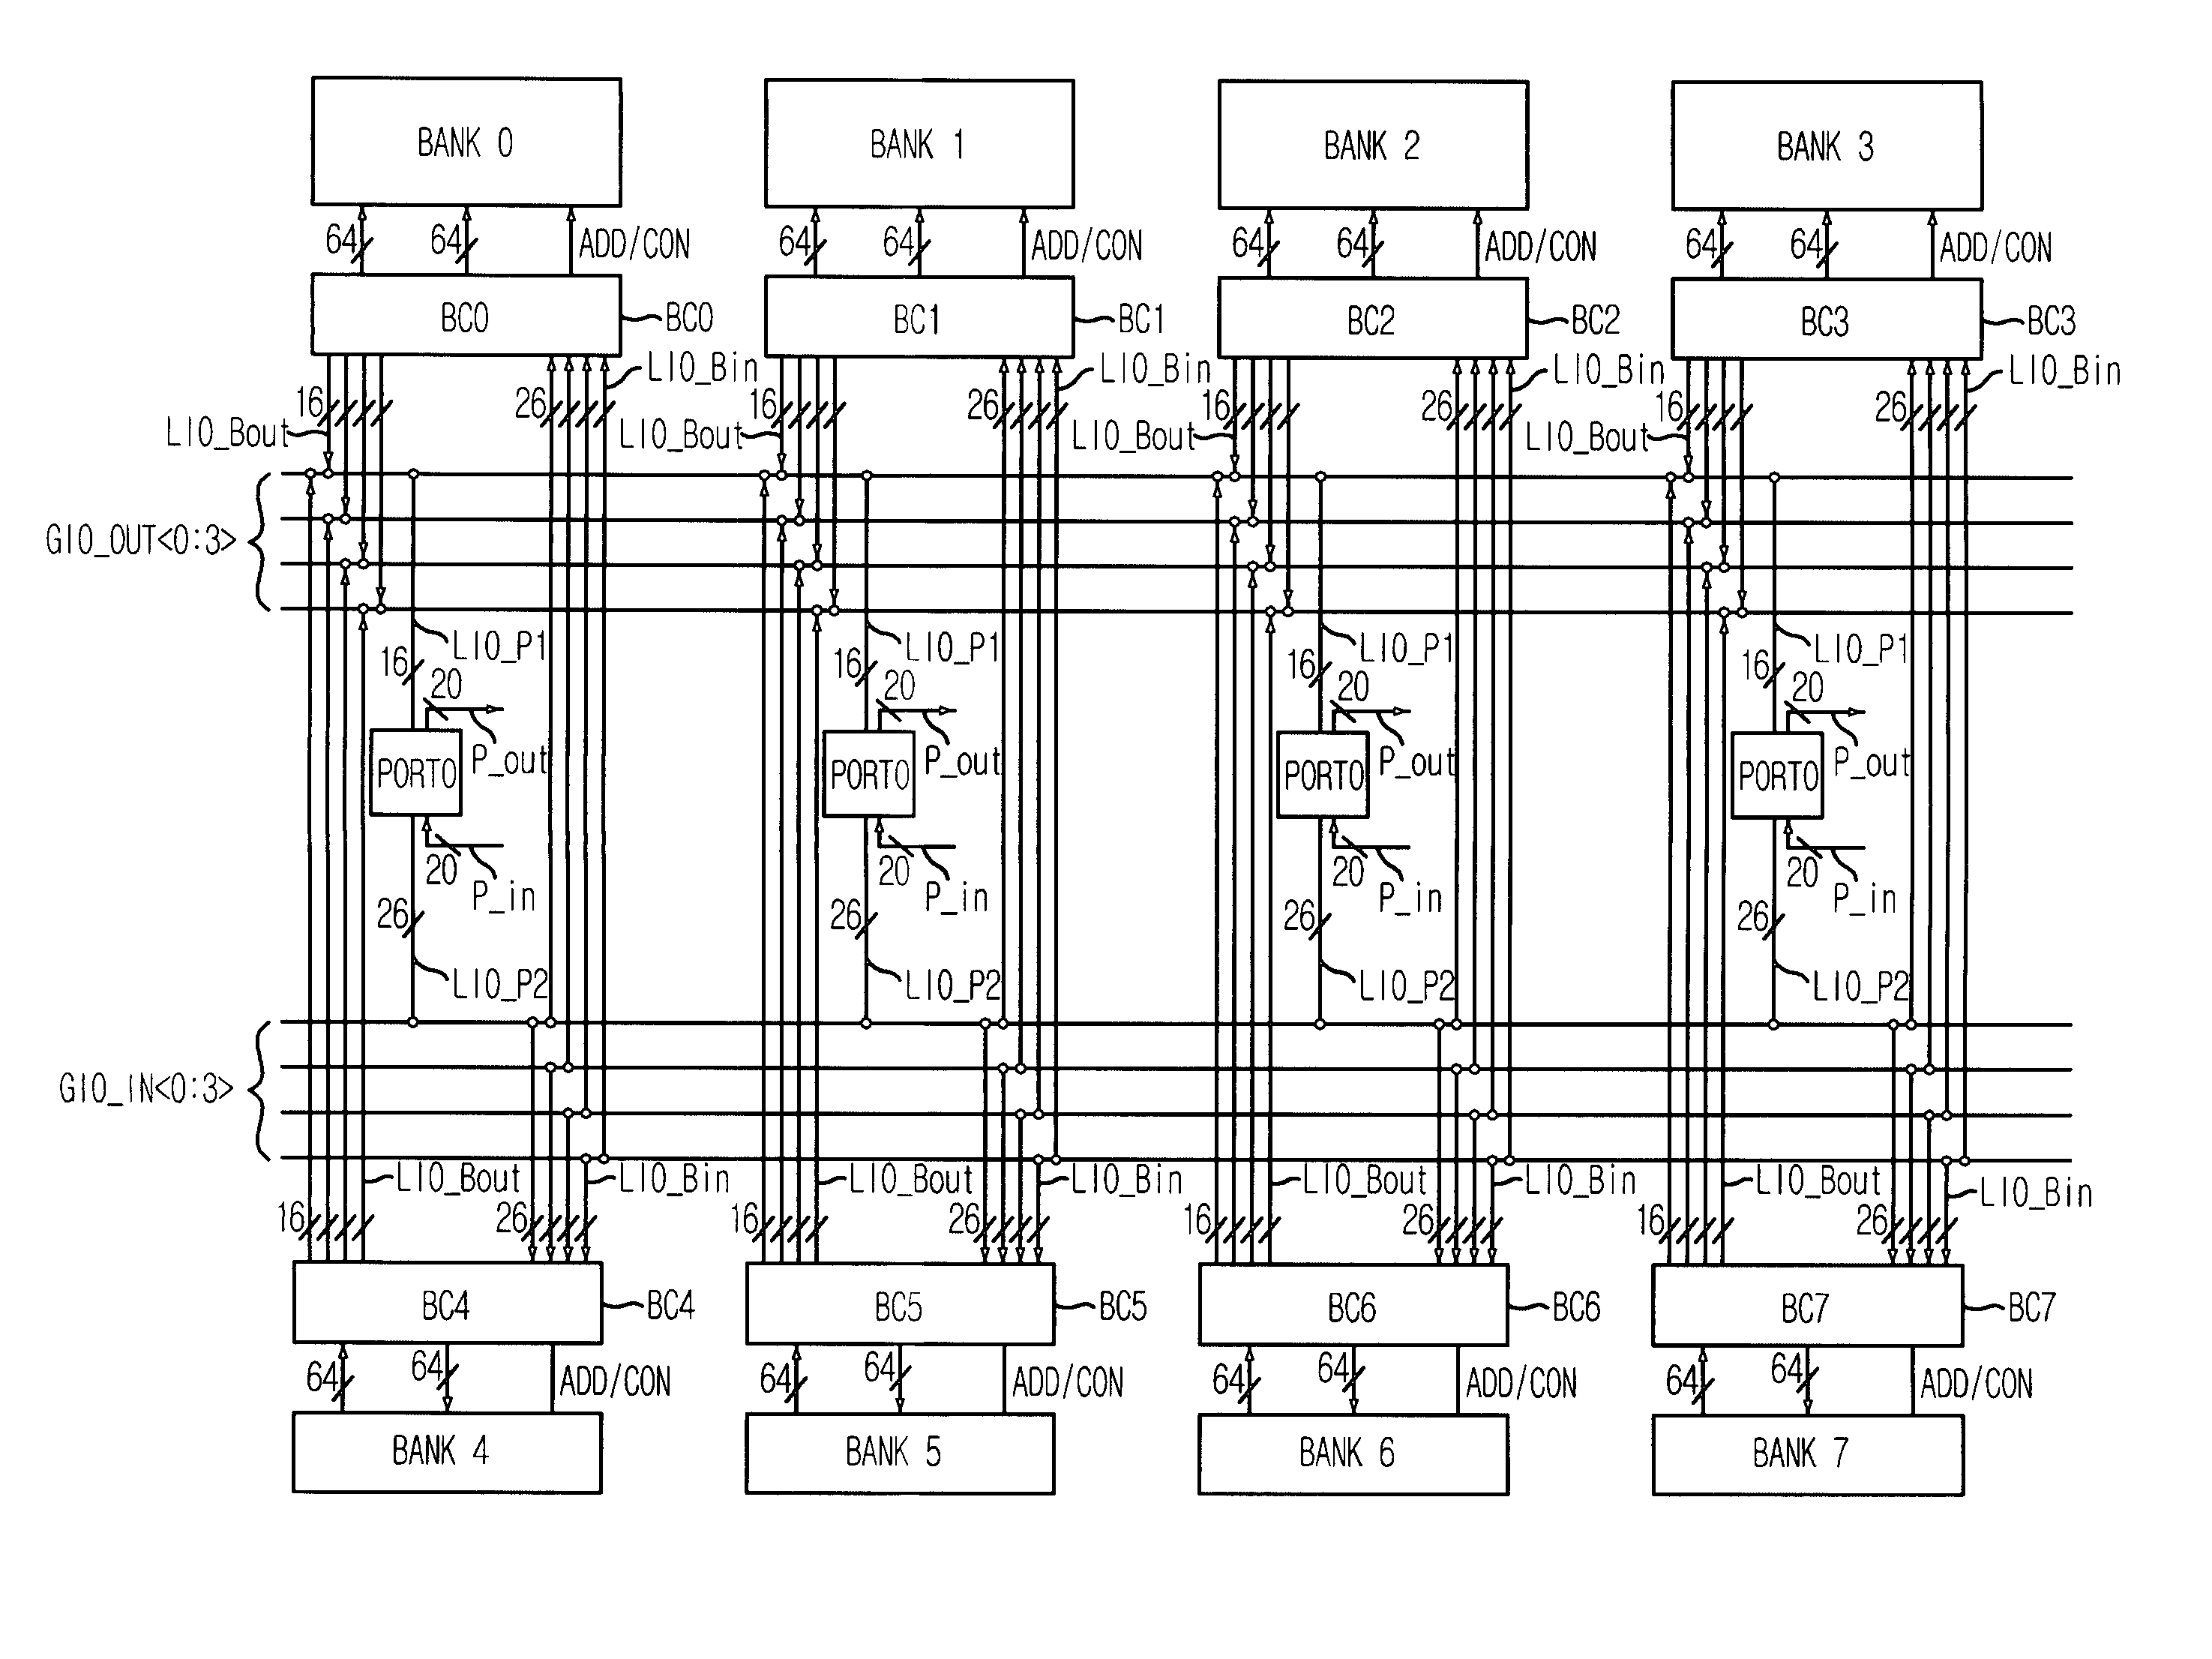 Test operation of multi-port memory device